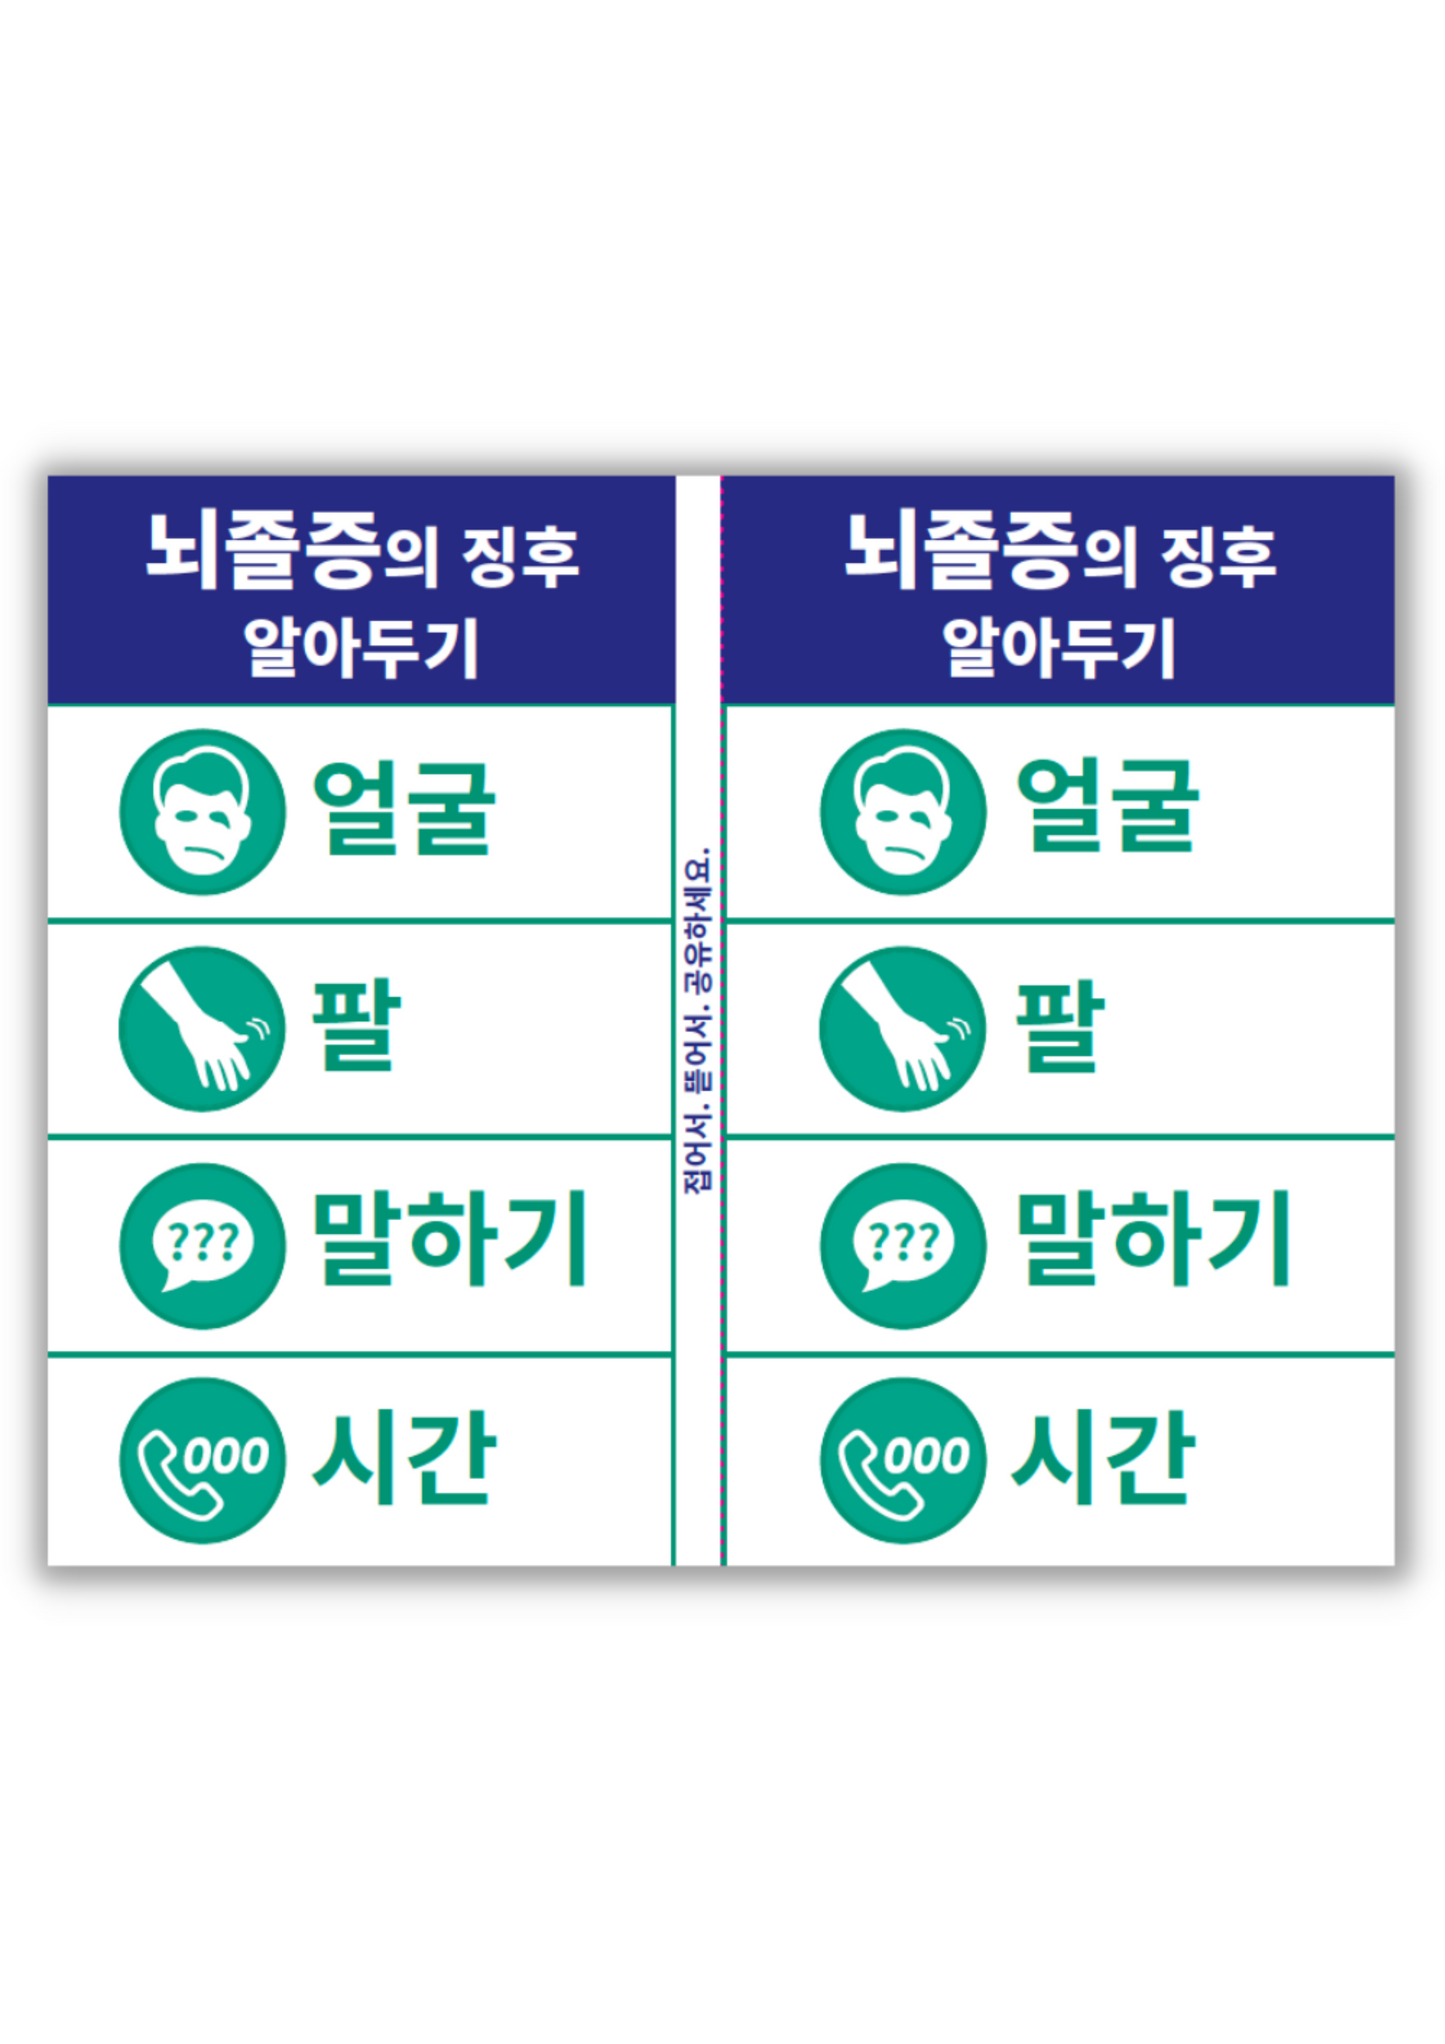 F.A.S.T. wallet cards - 한국어 (Korean) version (100 pack)